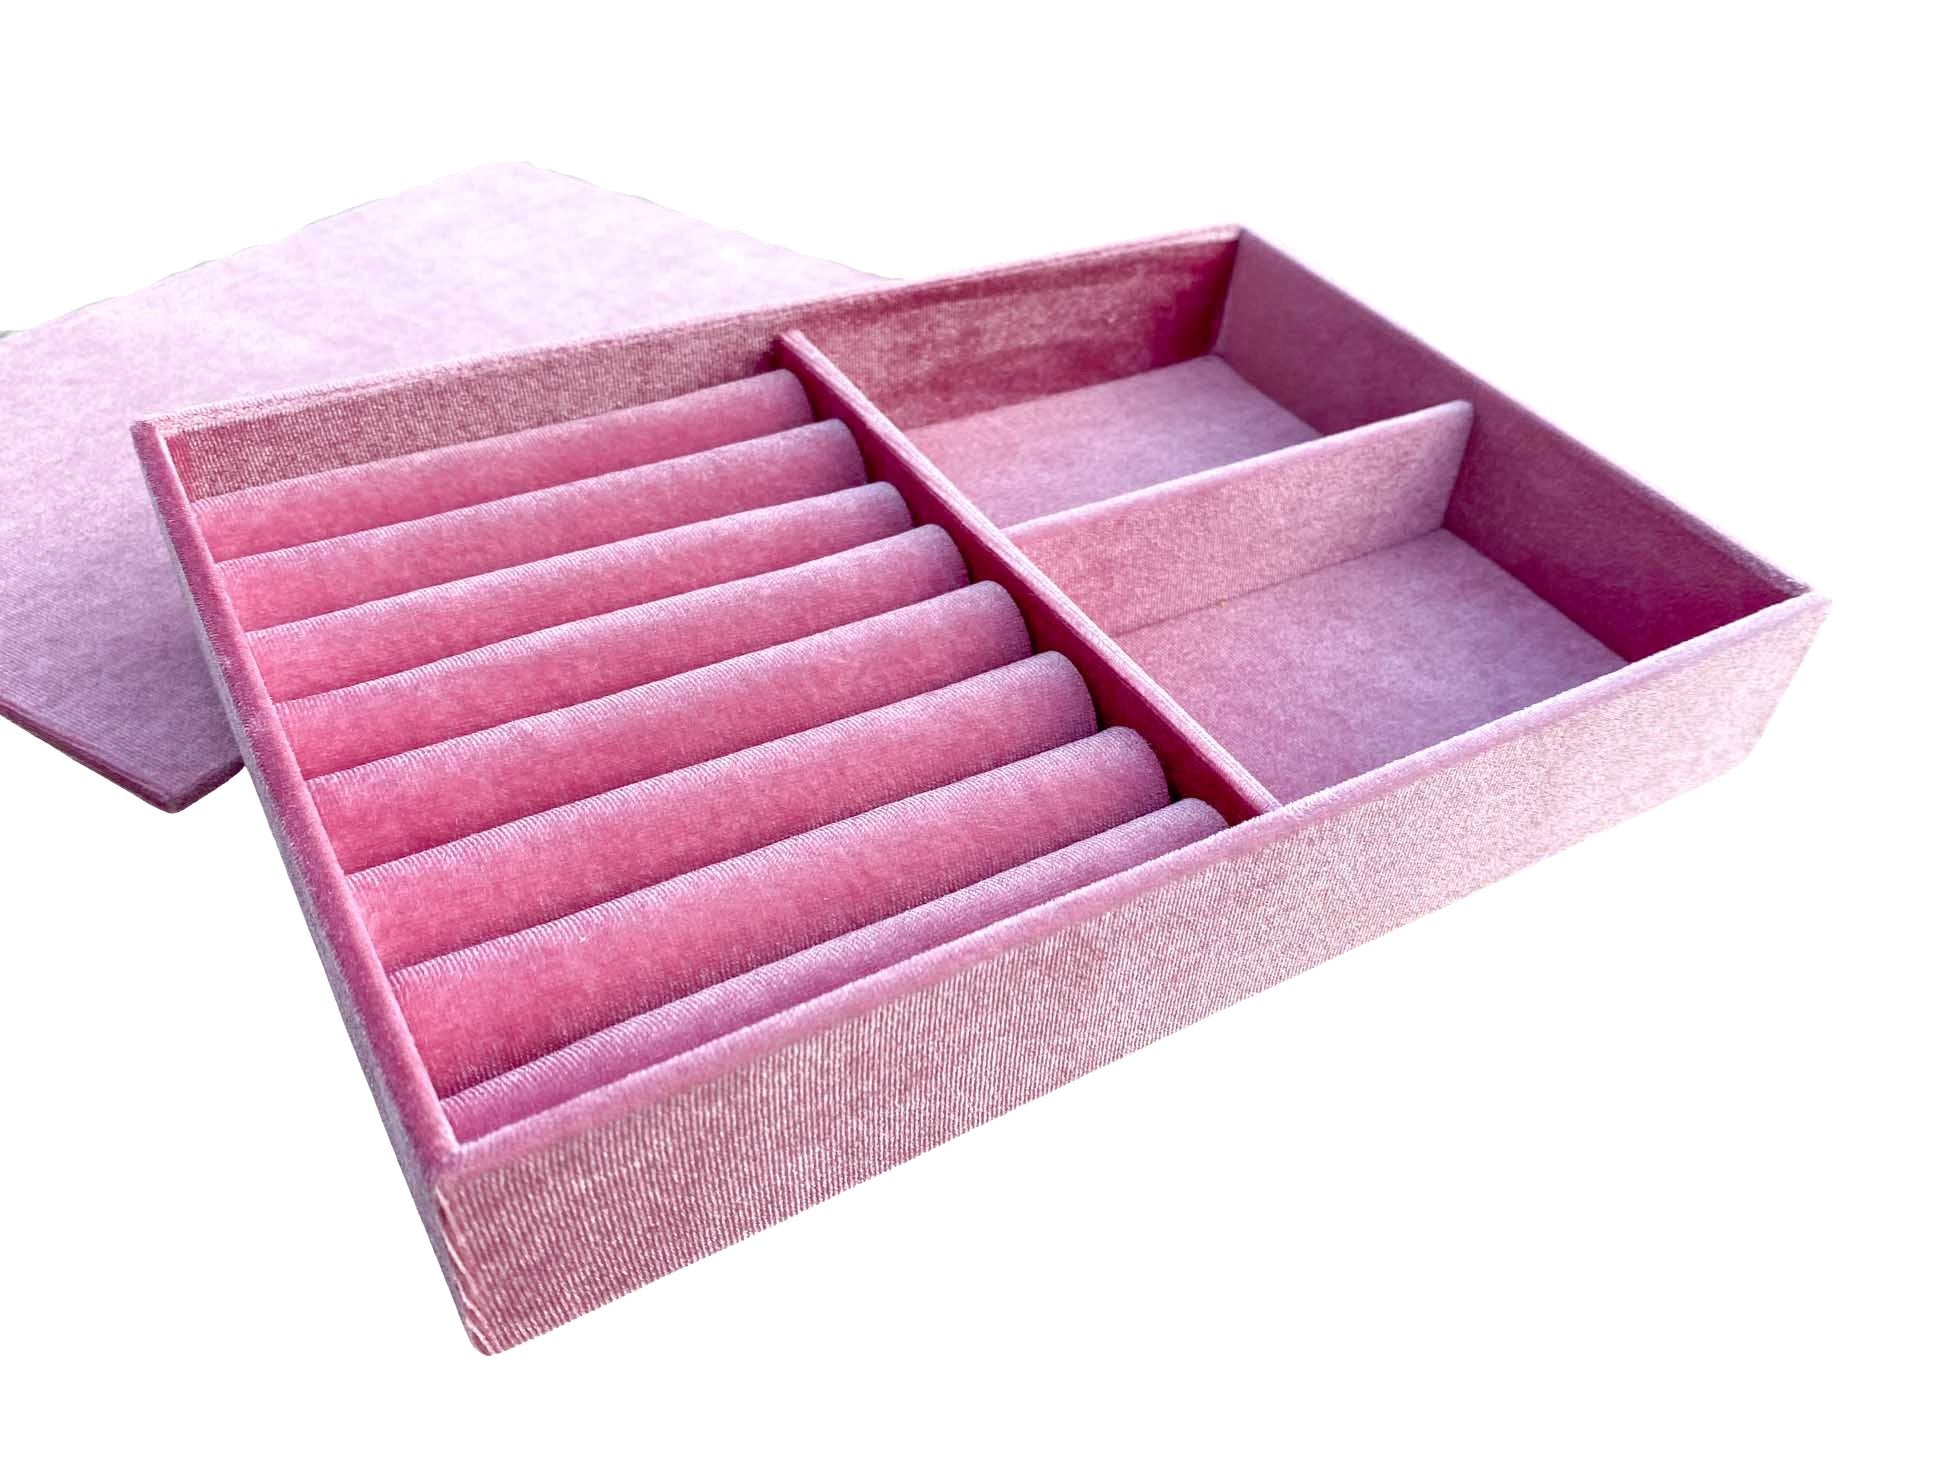 Aurora Designer - Large Multiple Ring Compartment Luxurious Velvet Jewelry  Ring Box Tray Display Case Birthday Gift for Her Multi Row Rings Berry Pink  RB006